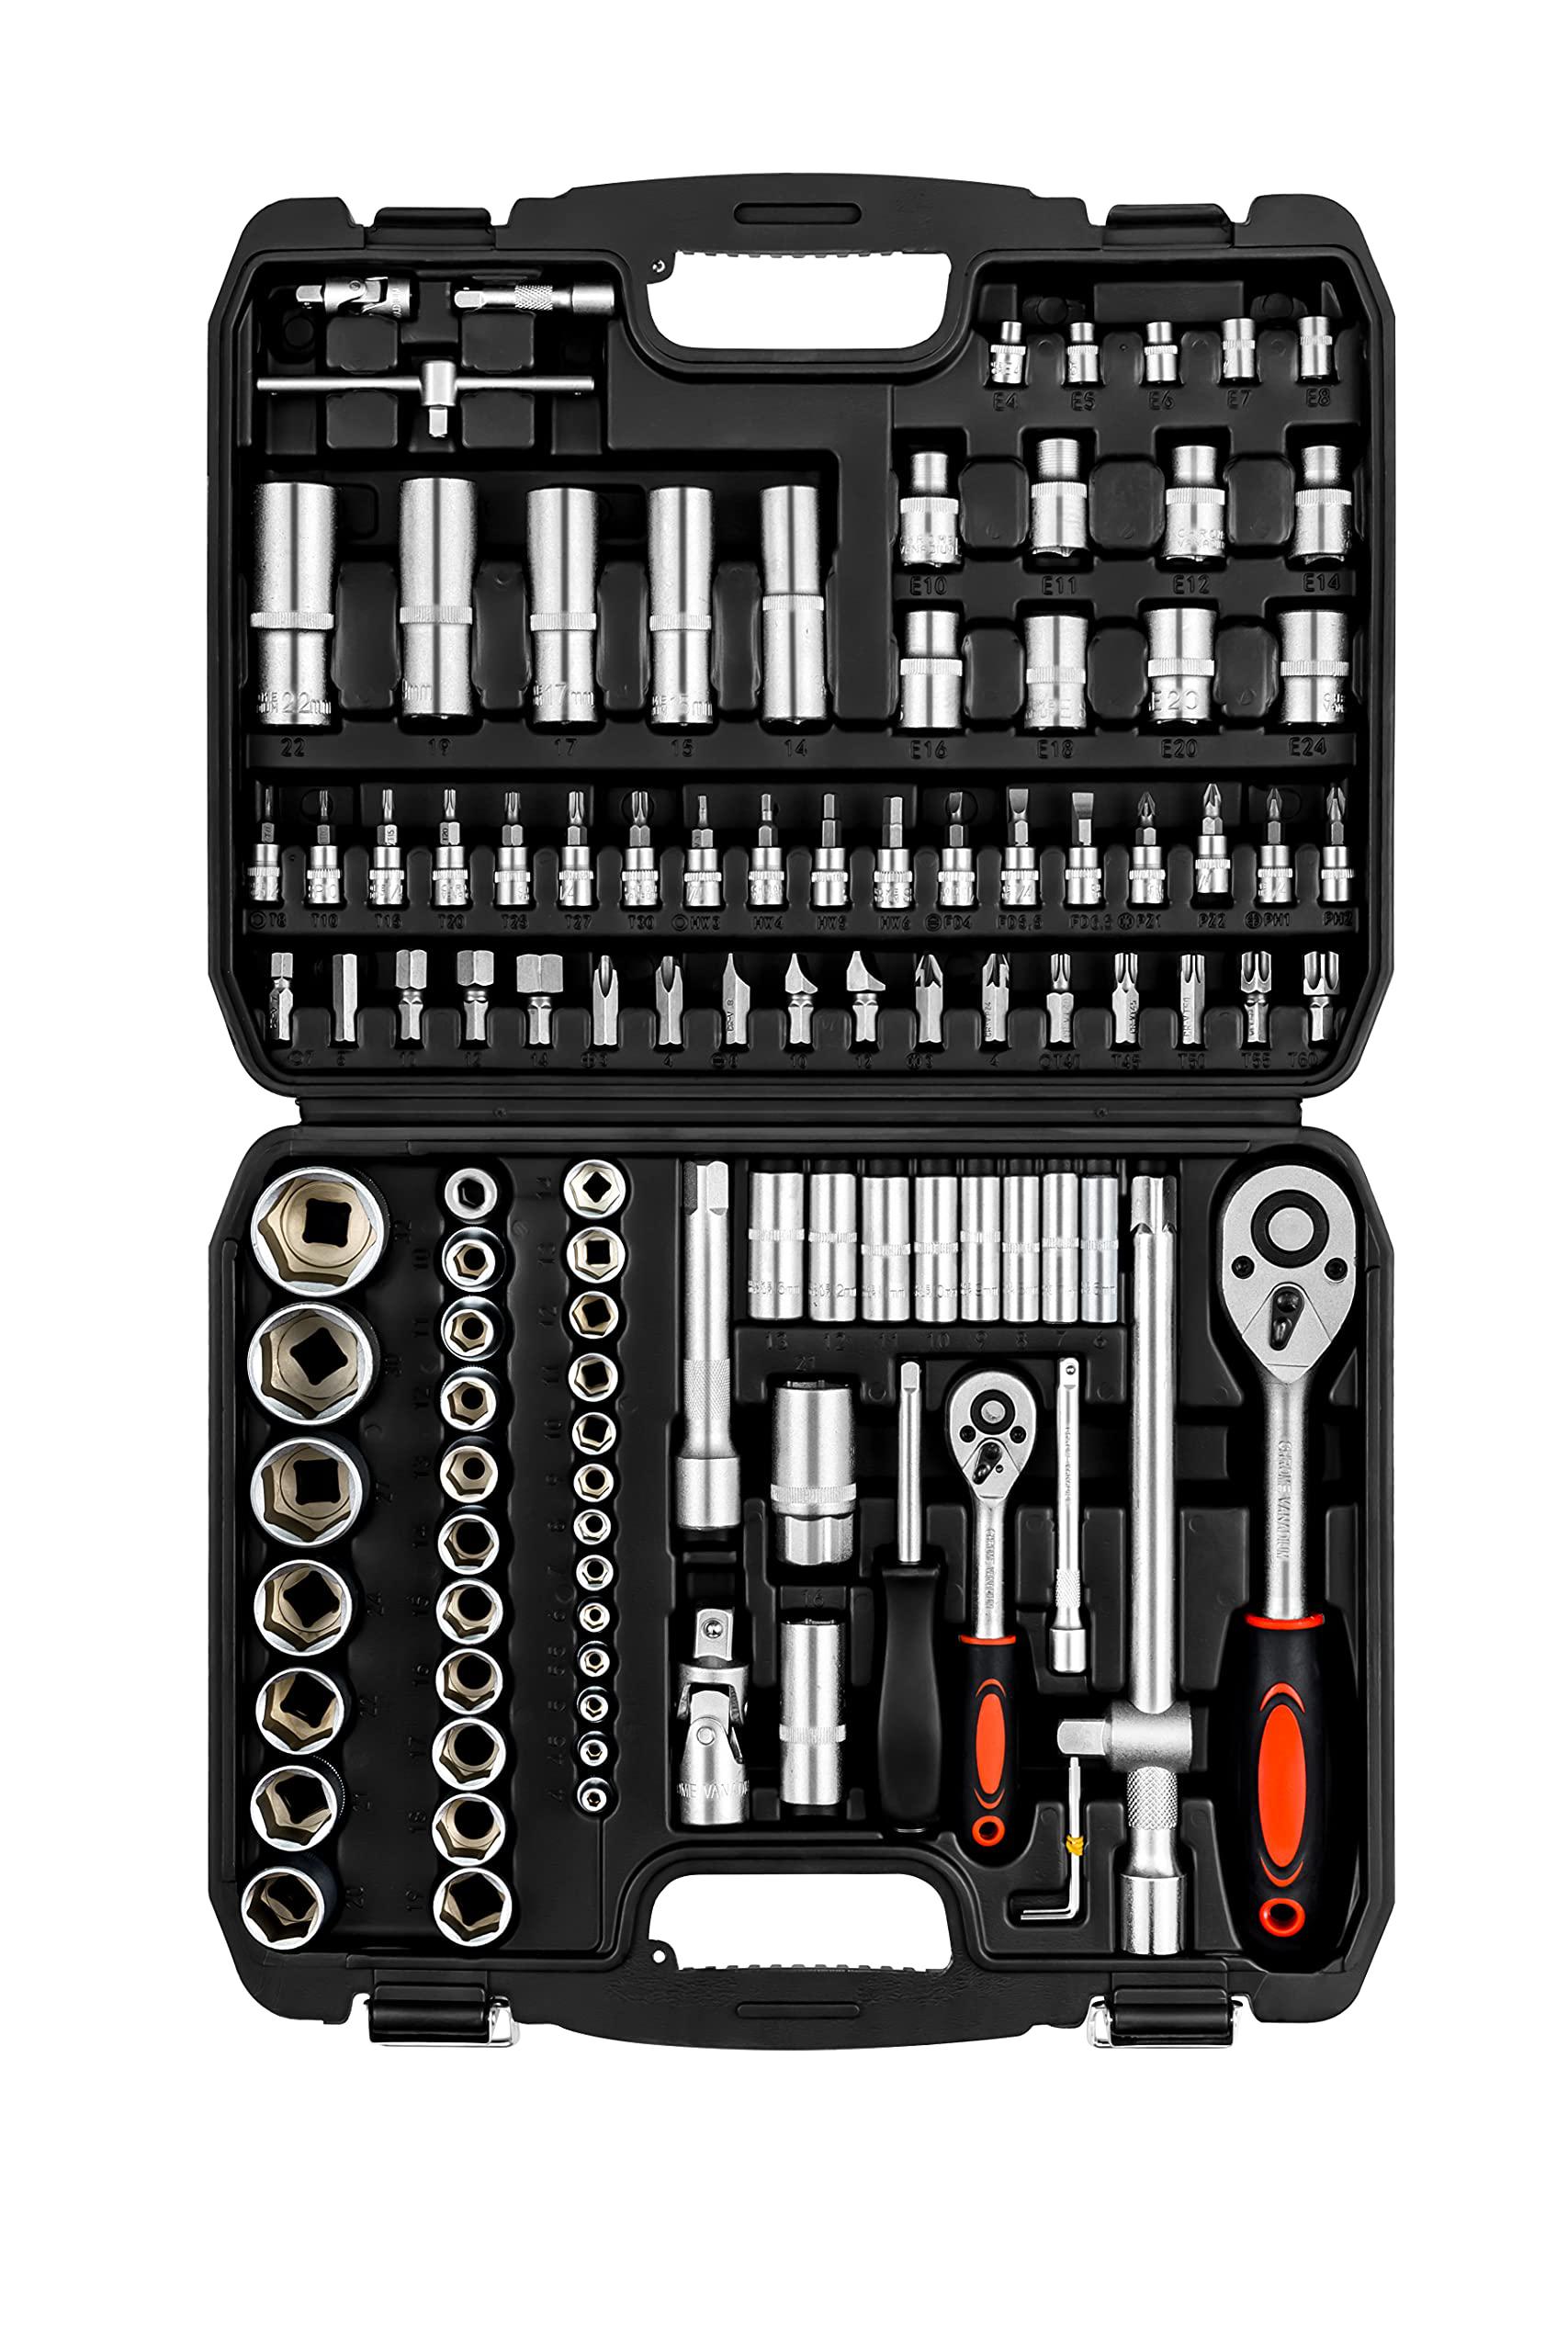 XHTT 108piece socket wrench and metric 1/4 and 1/2 drive socket set, extension bars, sockets,quick release reversible ratchet wren